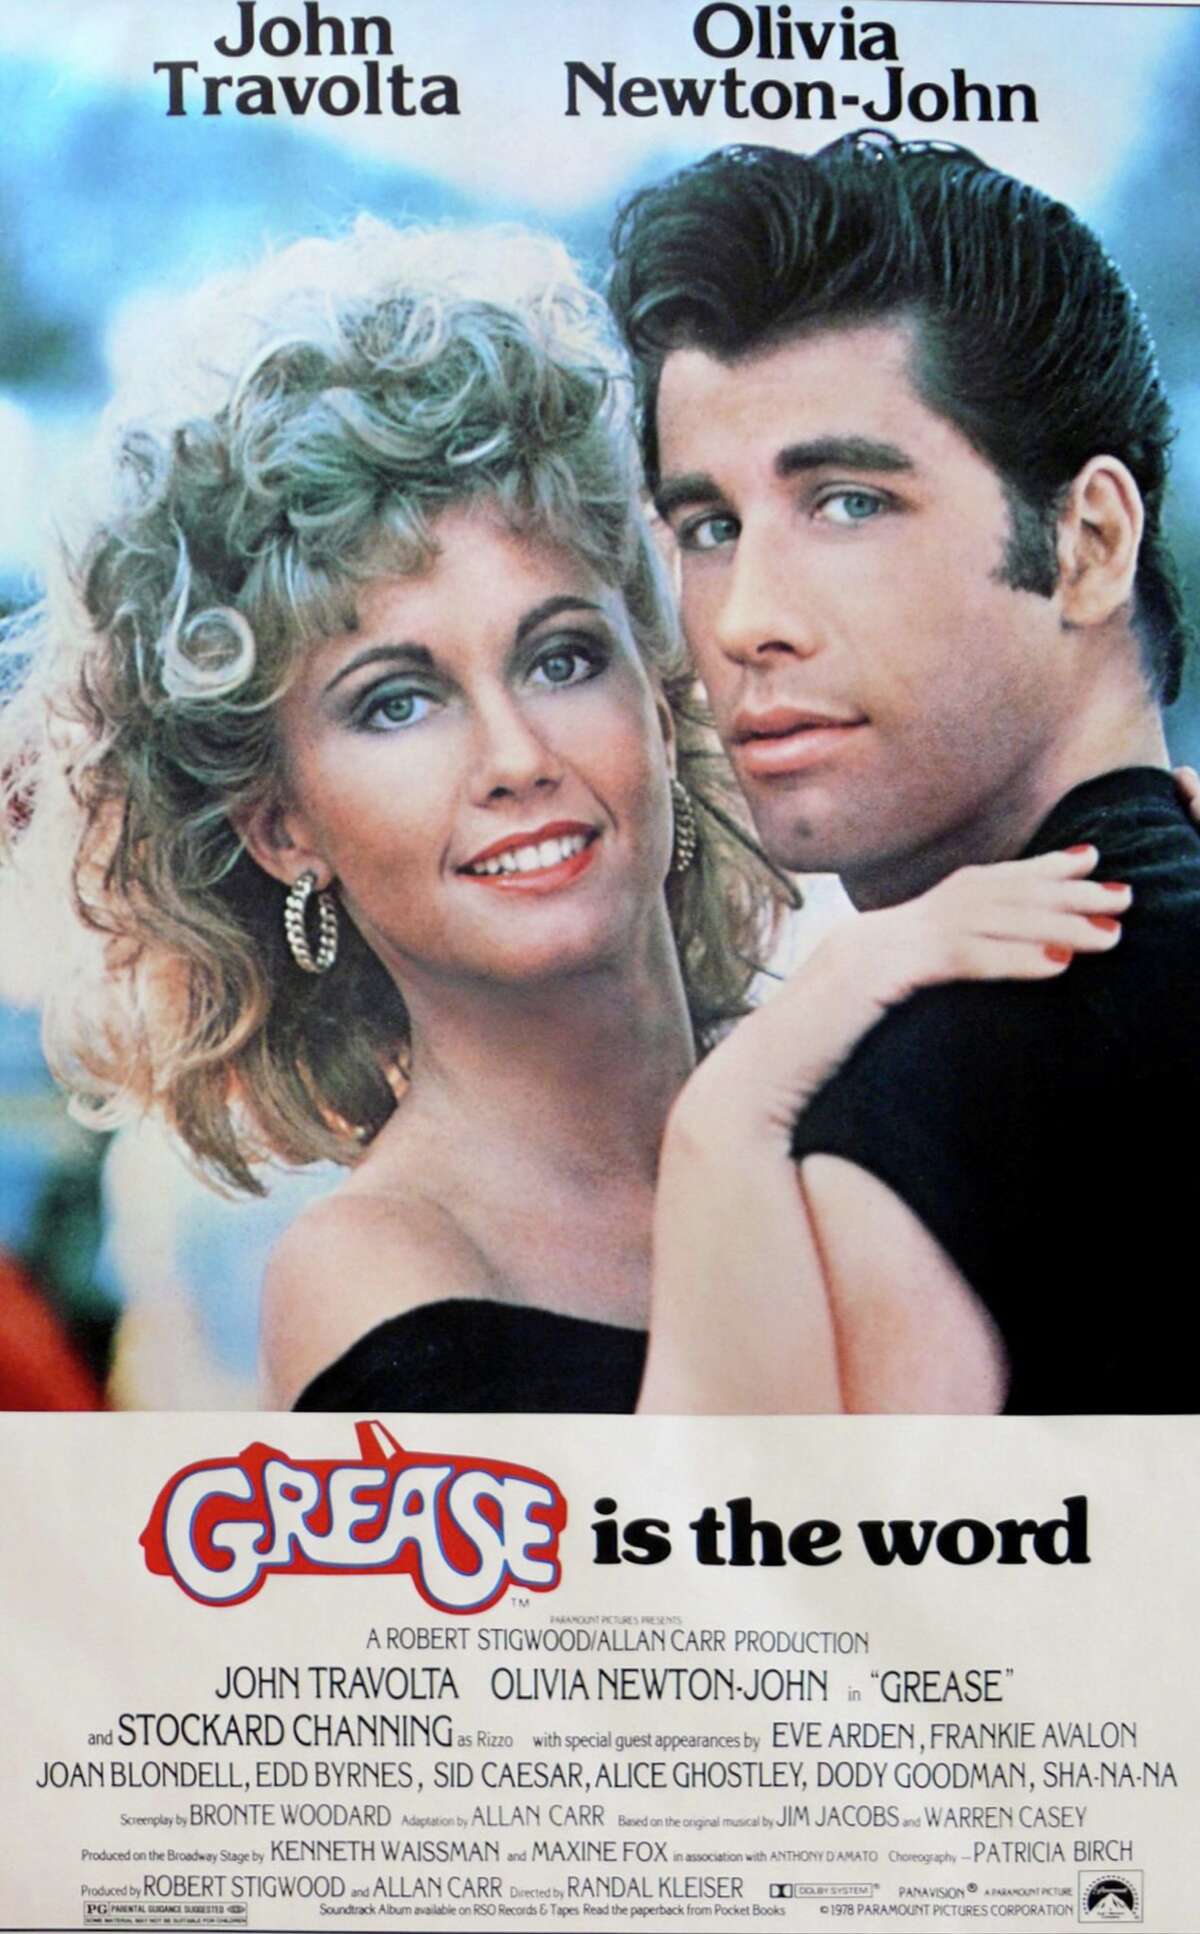 Stills from the movie 'Grease'